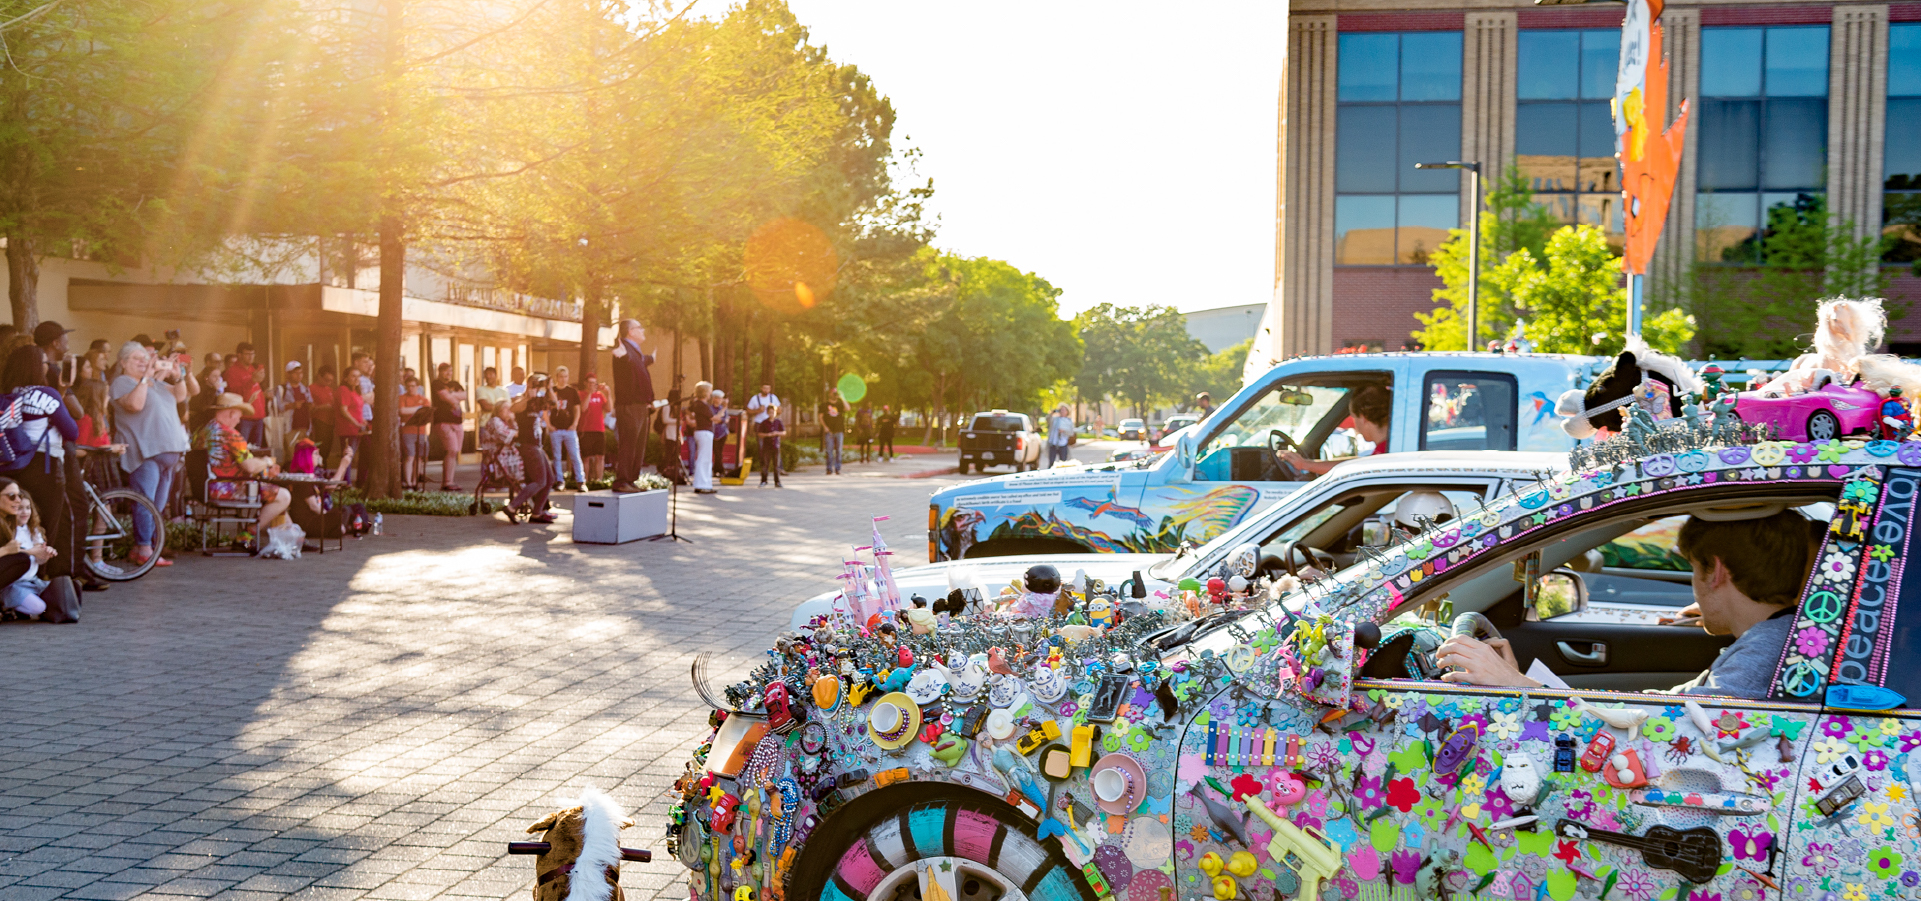 A crowd in front of the Mitchell Ceneter building stand behind a presenter facing several art cars displayed on the right which are decorated with paintings and toys and other paraphernalia.